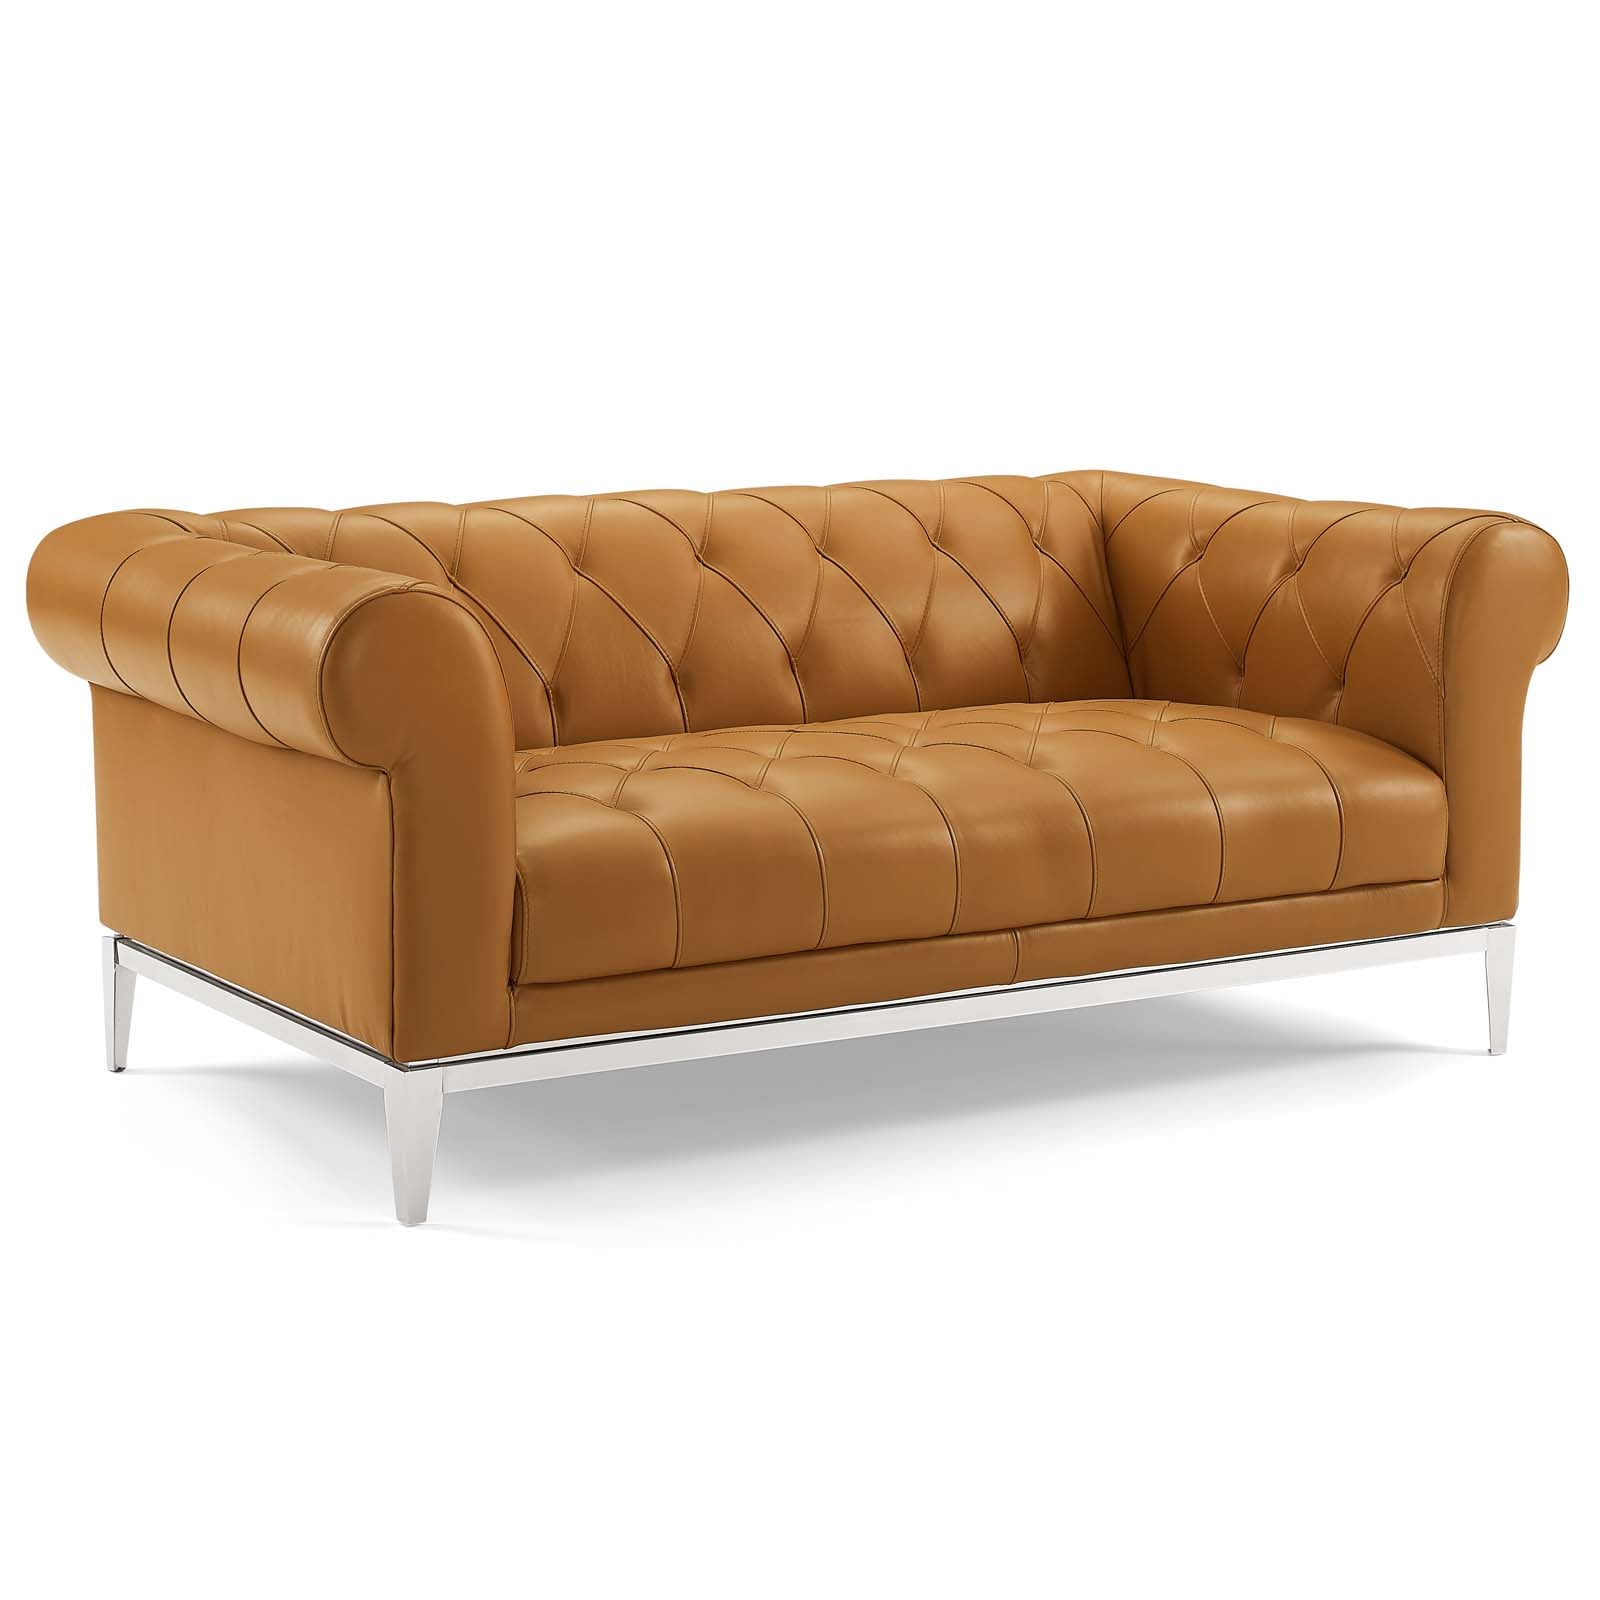 Idyll Tufted Upholstered Leather Sofa and Loveseat Set-Sofa Set-Modway-Wall2Wall Furnishings